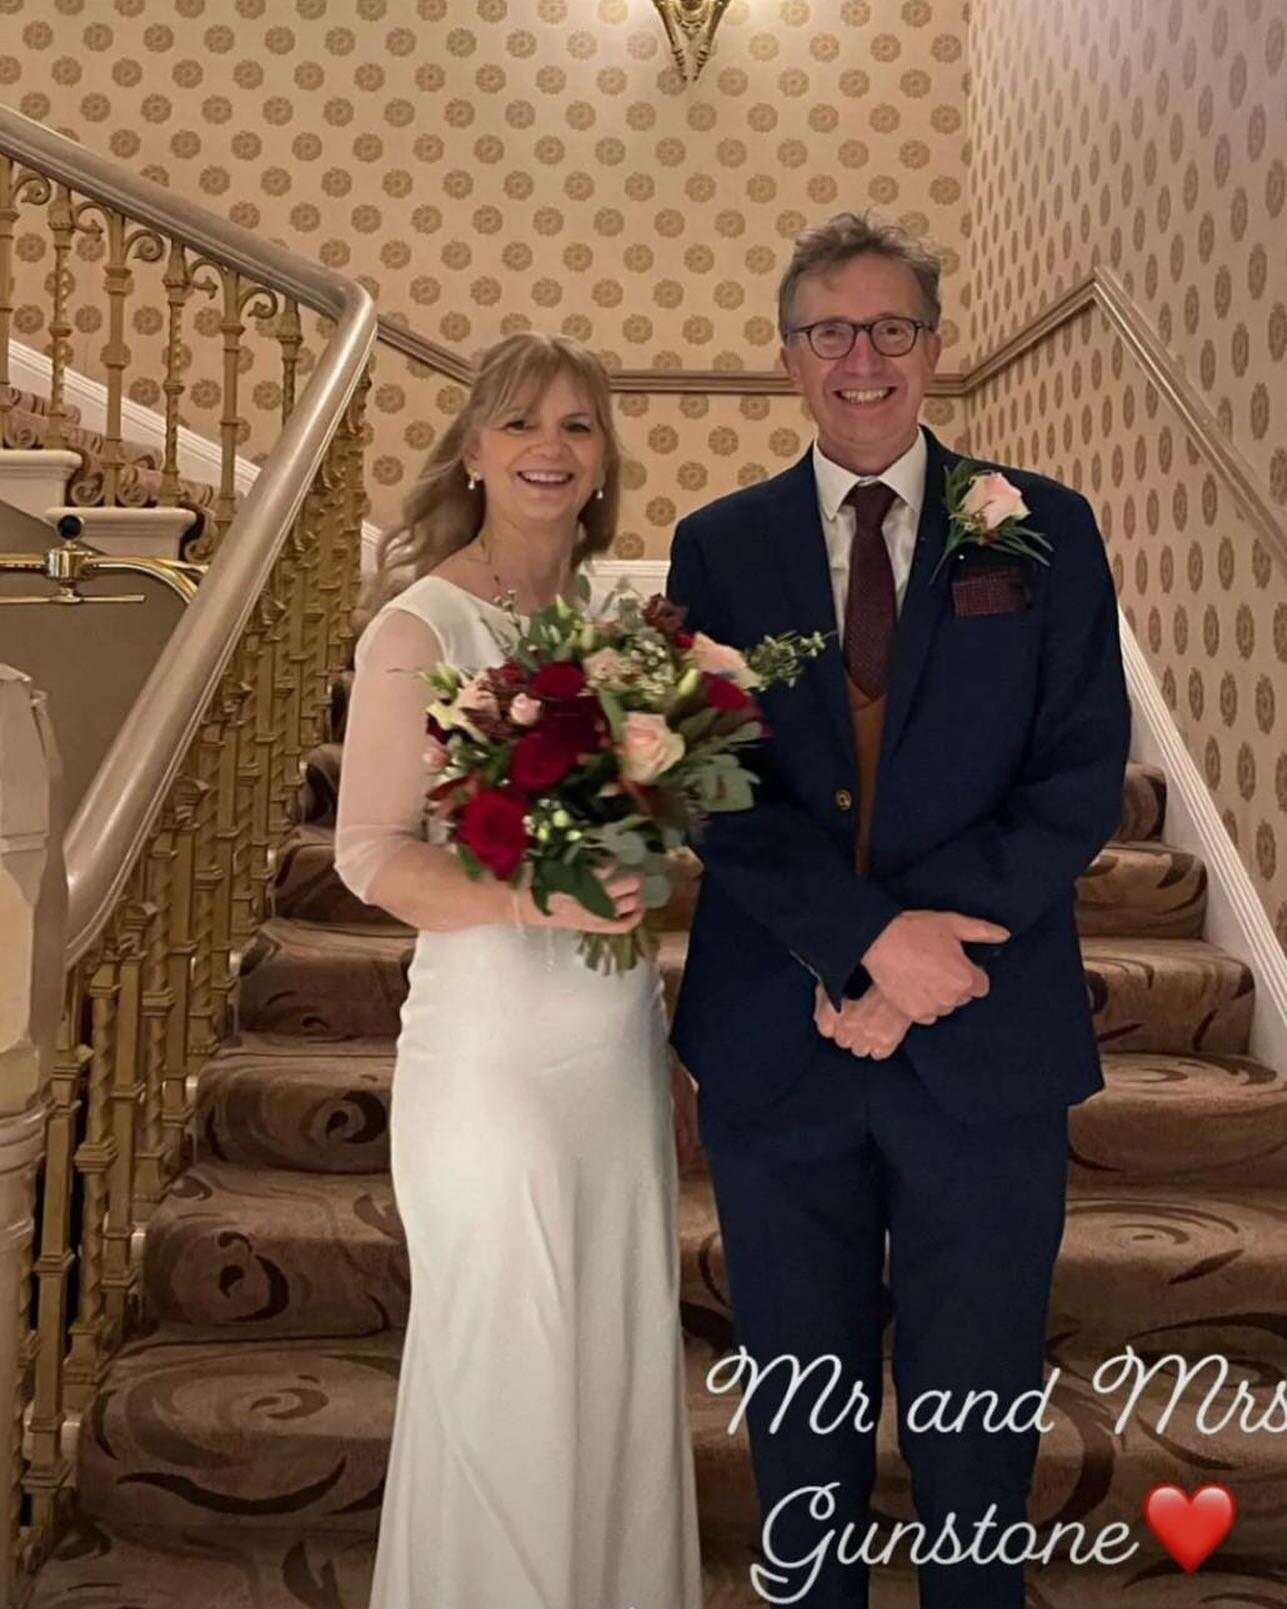 We would like to share some exciting news!! 

Yesterday our vet Rupert and his partner Louise, who&rsquo;s also a vet nurse and an important part of our practice, tied the knot at long last!! 

A huge congratulations to them both. We&rsquo;re all so 